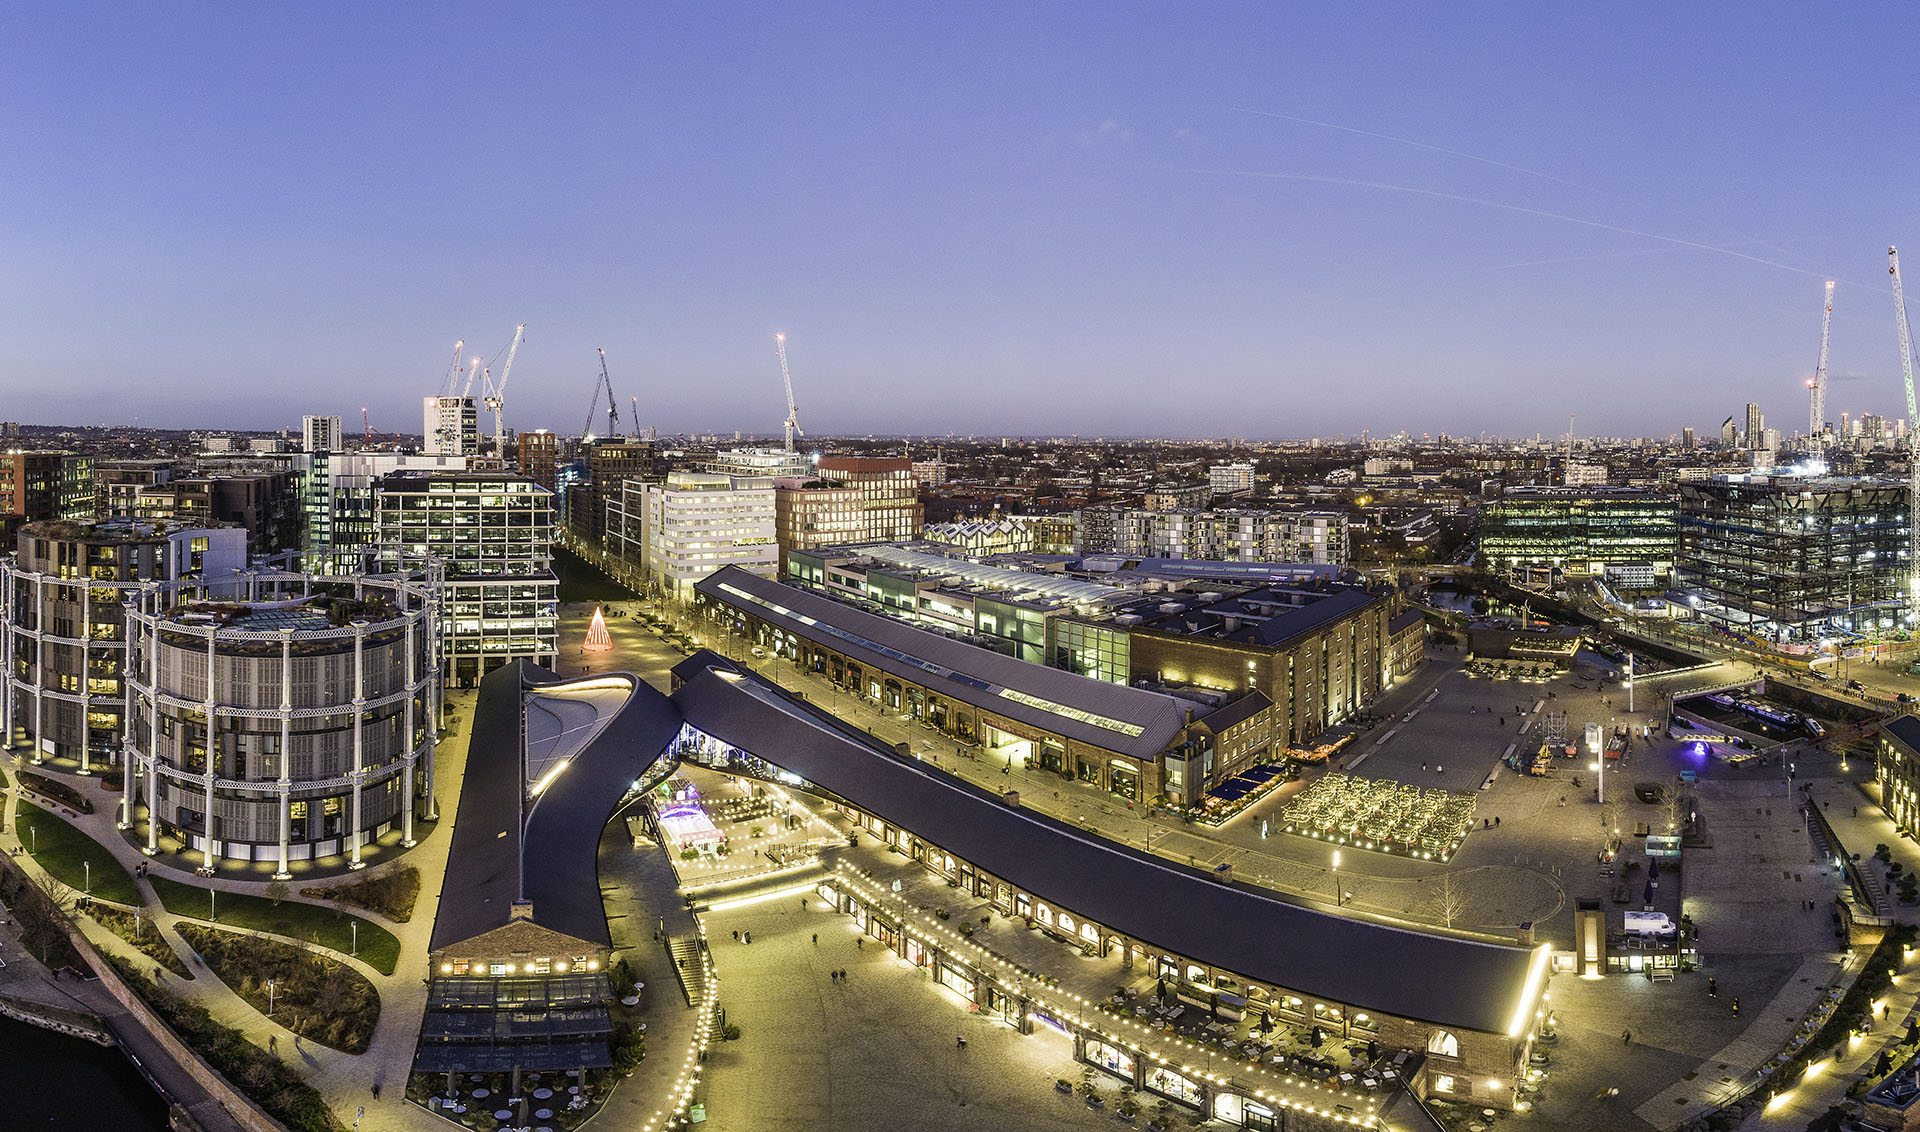 Aerial view of Kings Cross redevelopment Granary Square Coal Drops Yard in late evening